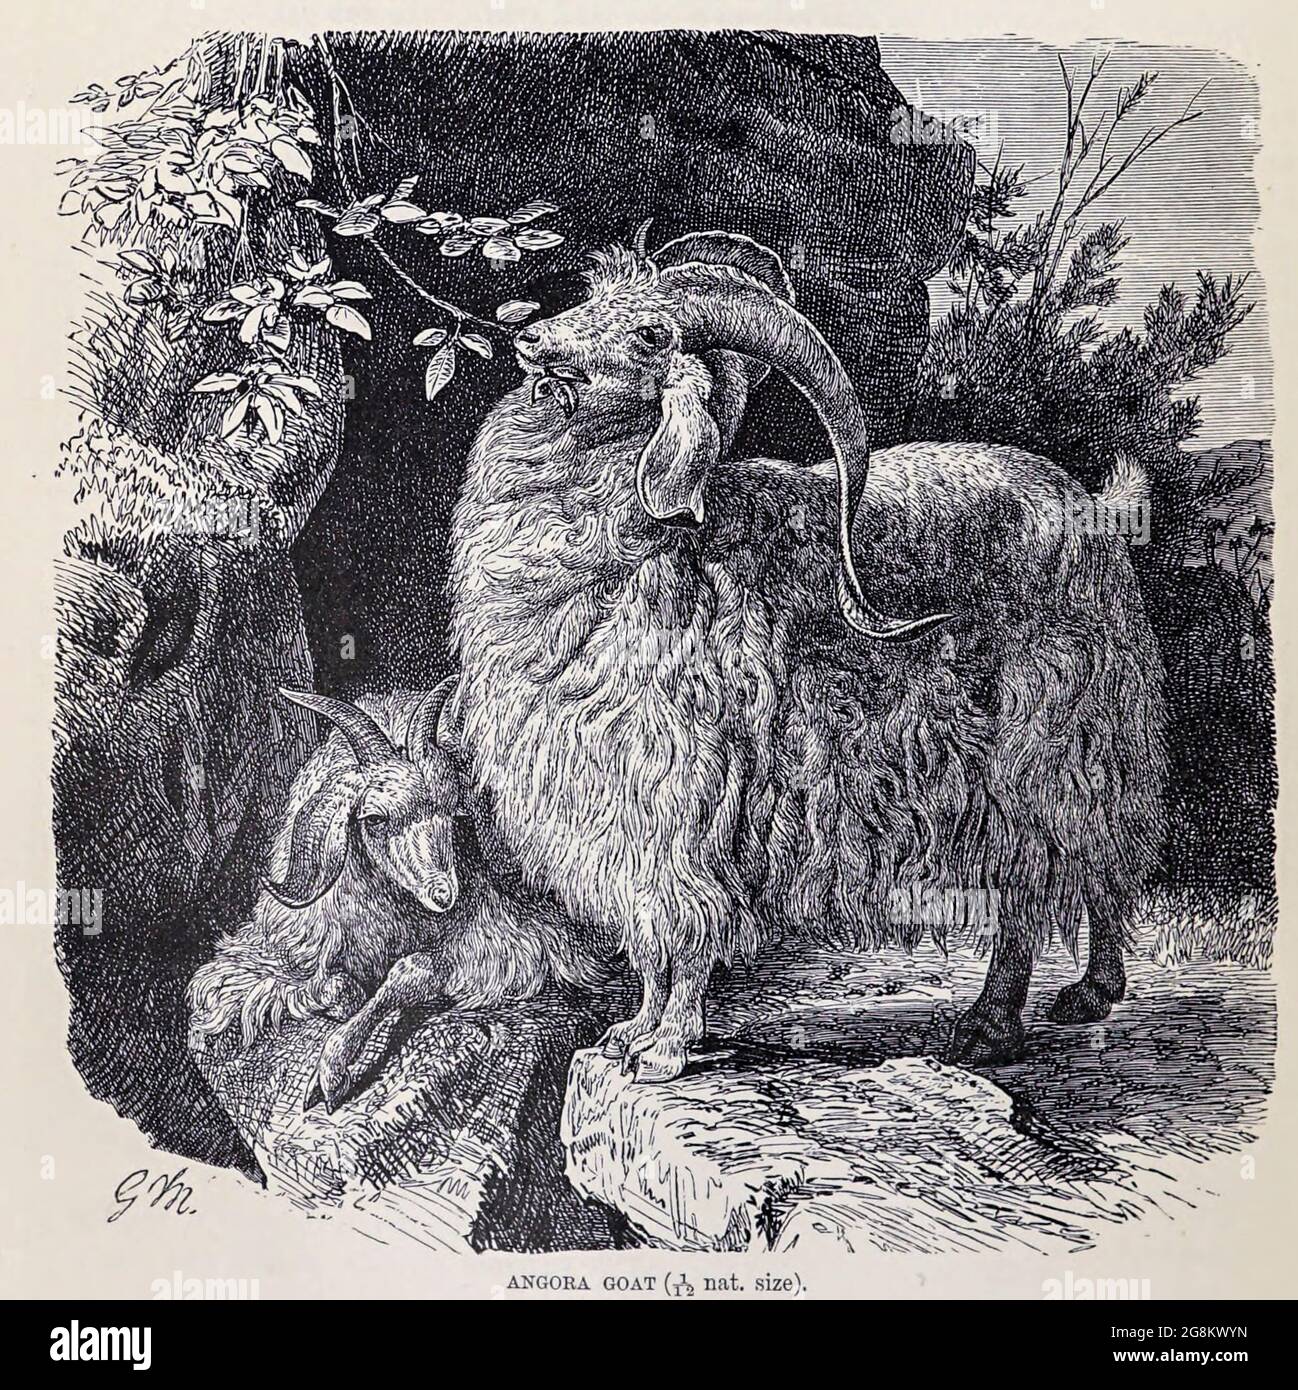 The Angora goat is a breed of domesticated goat, historically known as Angora. Angora goats produce the lustrous fibre known as mohair. From the book ' Royal Natural History ' Volume 2 Edited by Richard Lydekker, Published in London by Frederick Warne & Co in 1893-1894 Stock Photo